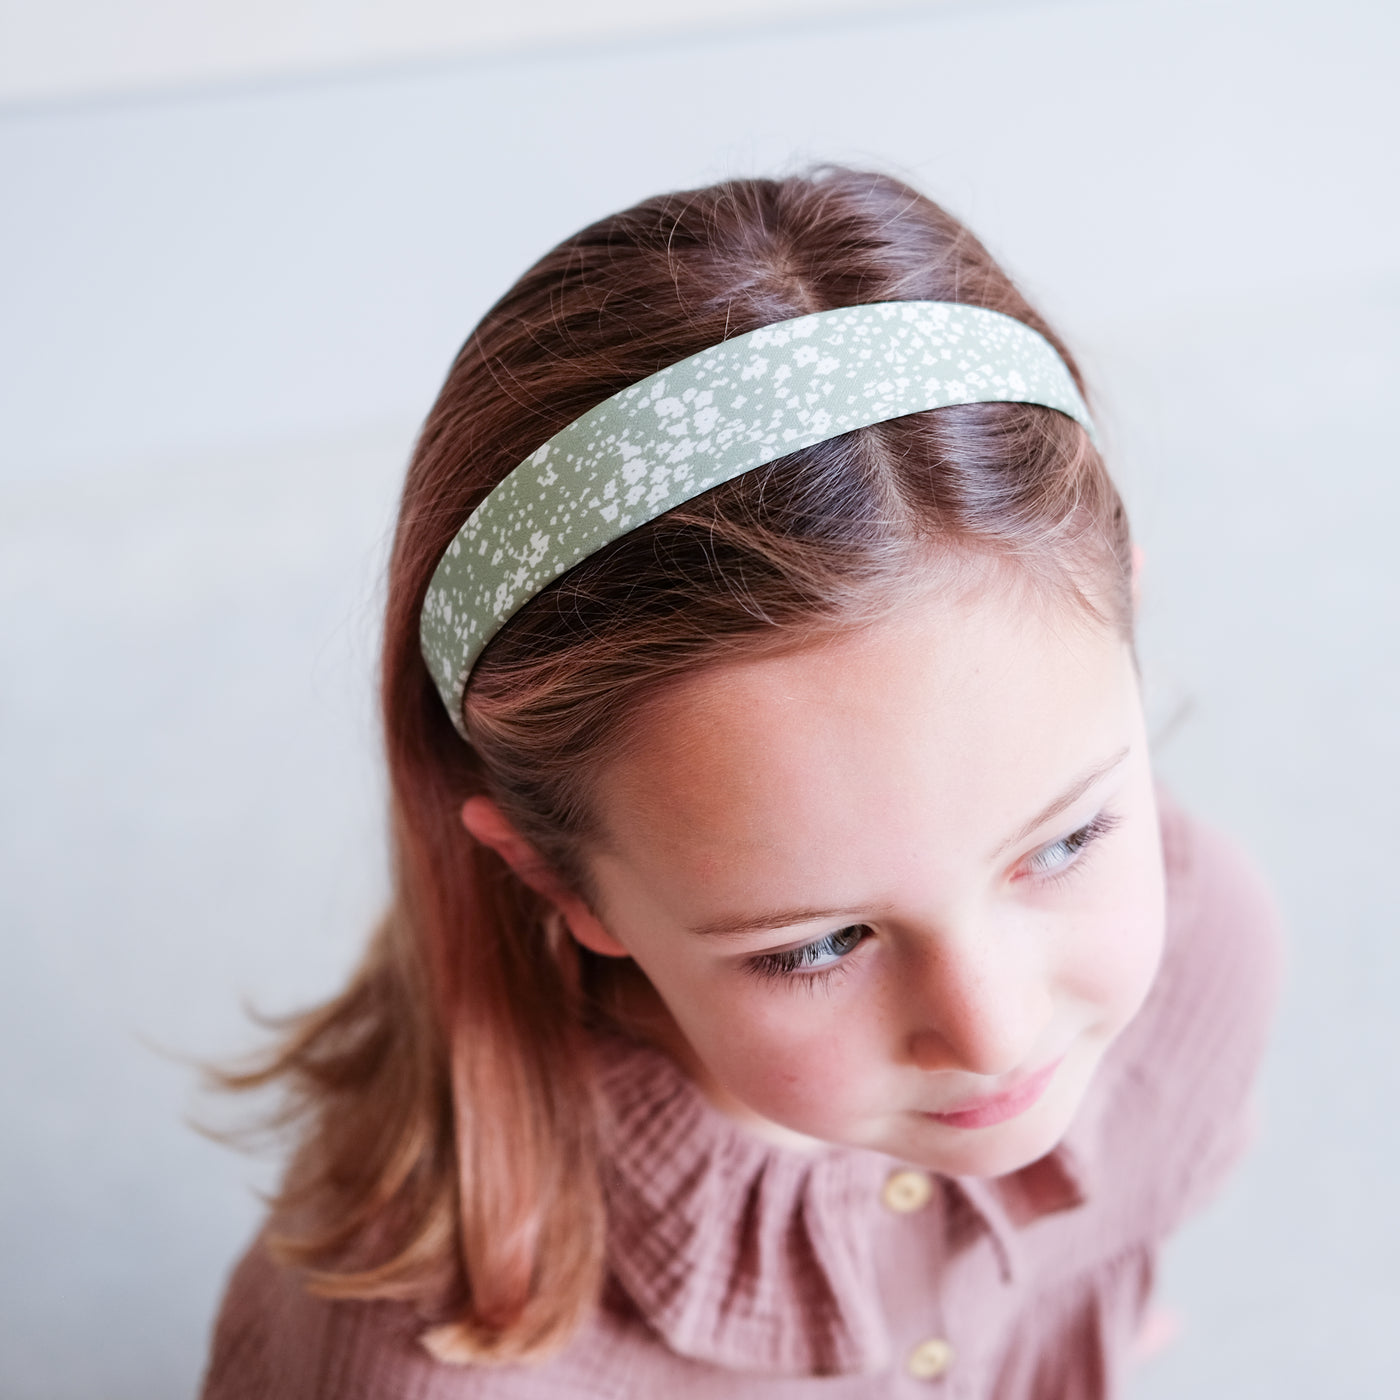 Green and white floral print children's headband